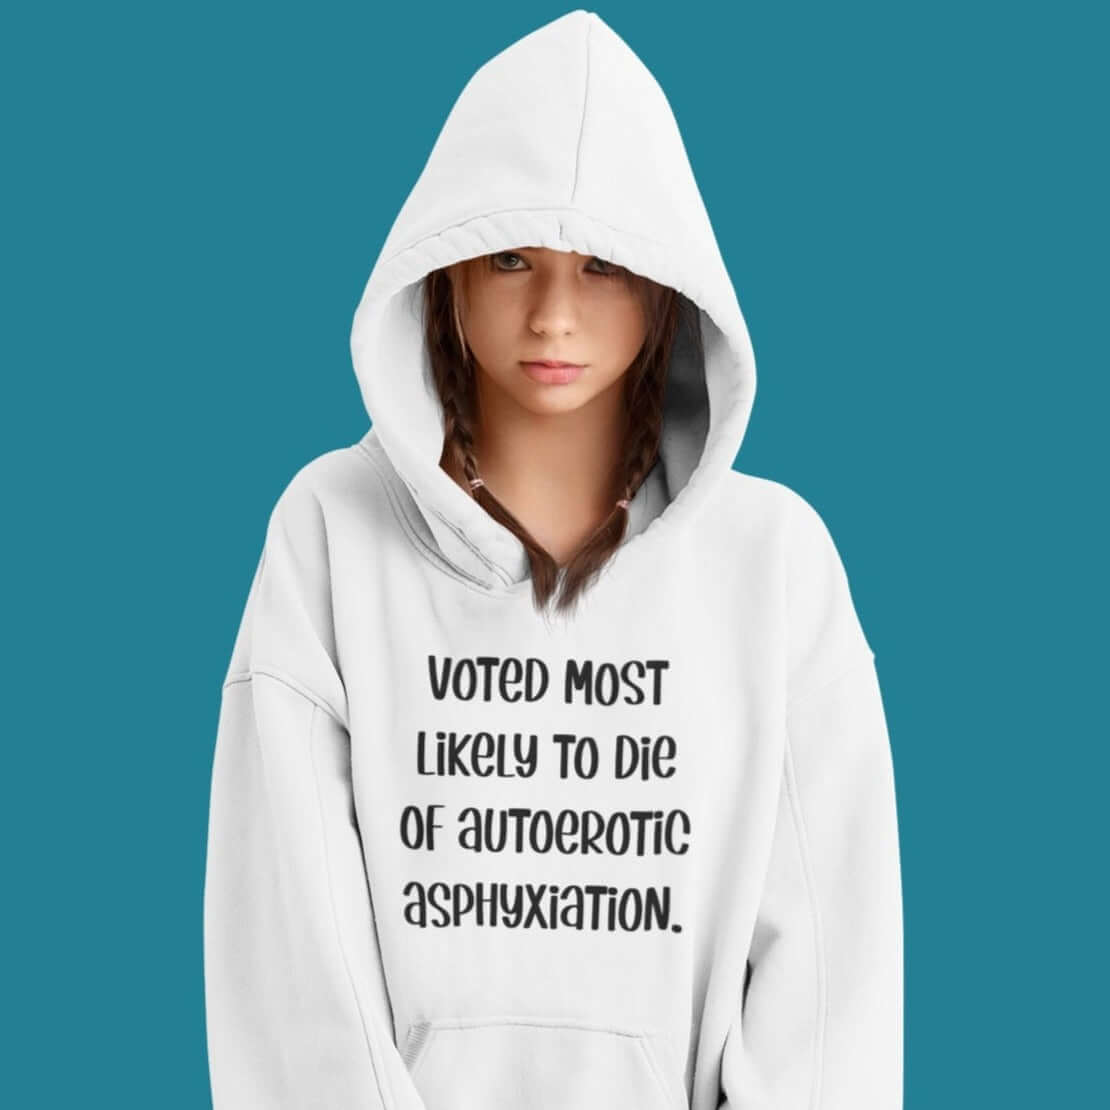 Voted most likely to die of autoerotic asphyxiation hoodie